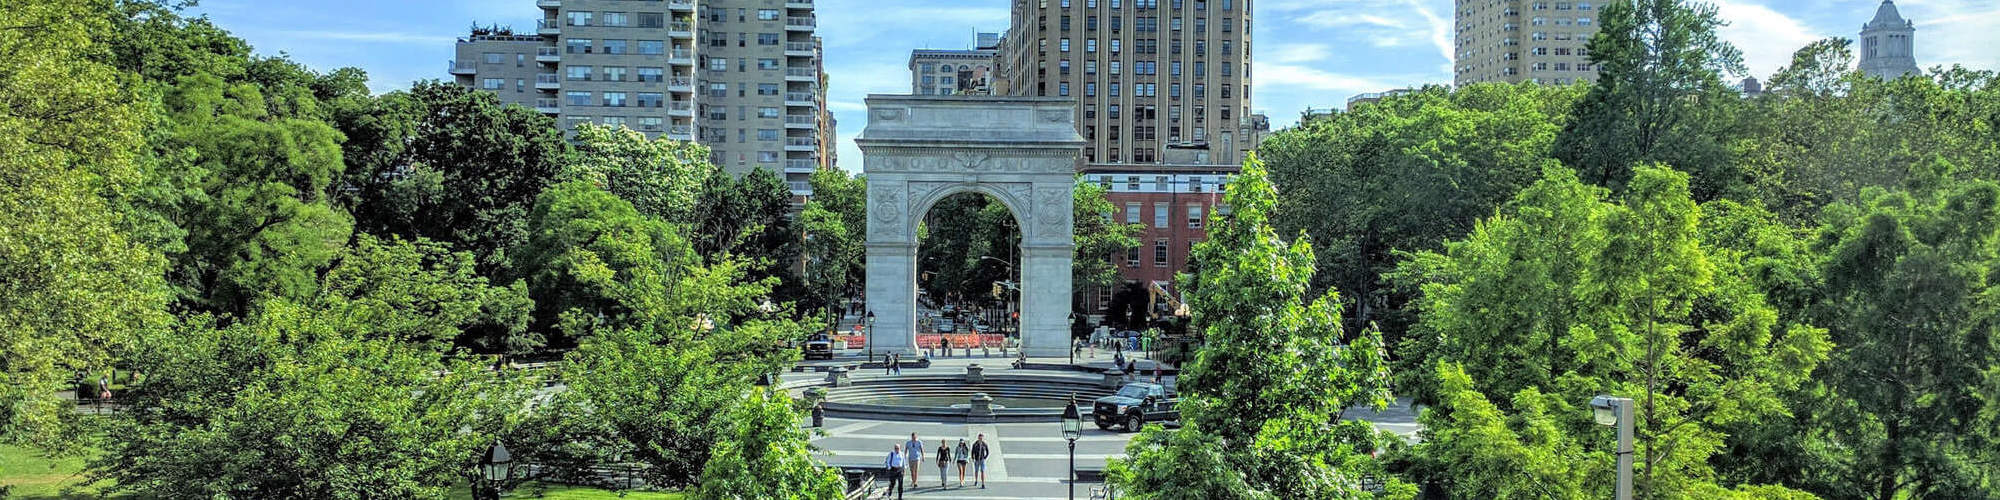 View of Washington Square Park from the south towards the fountain and arch